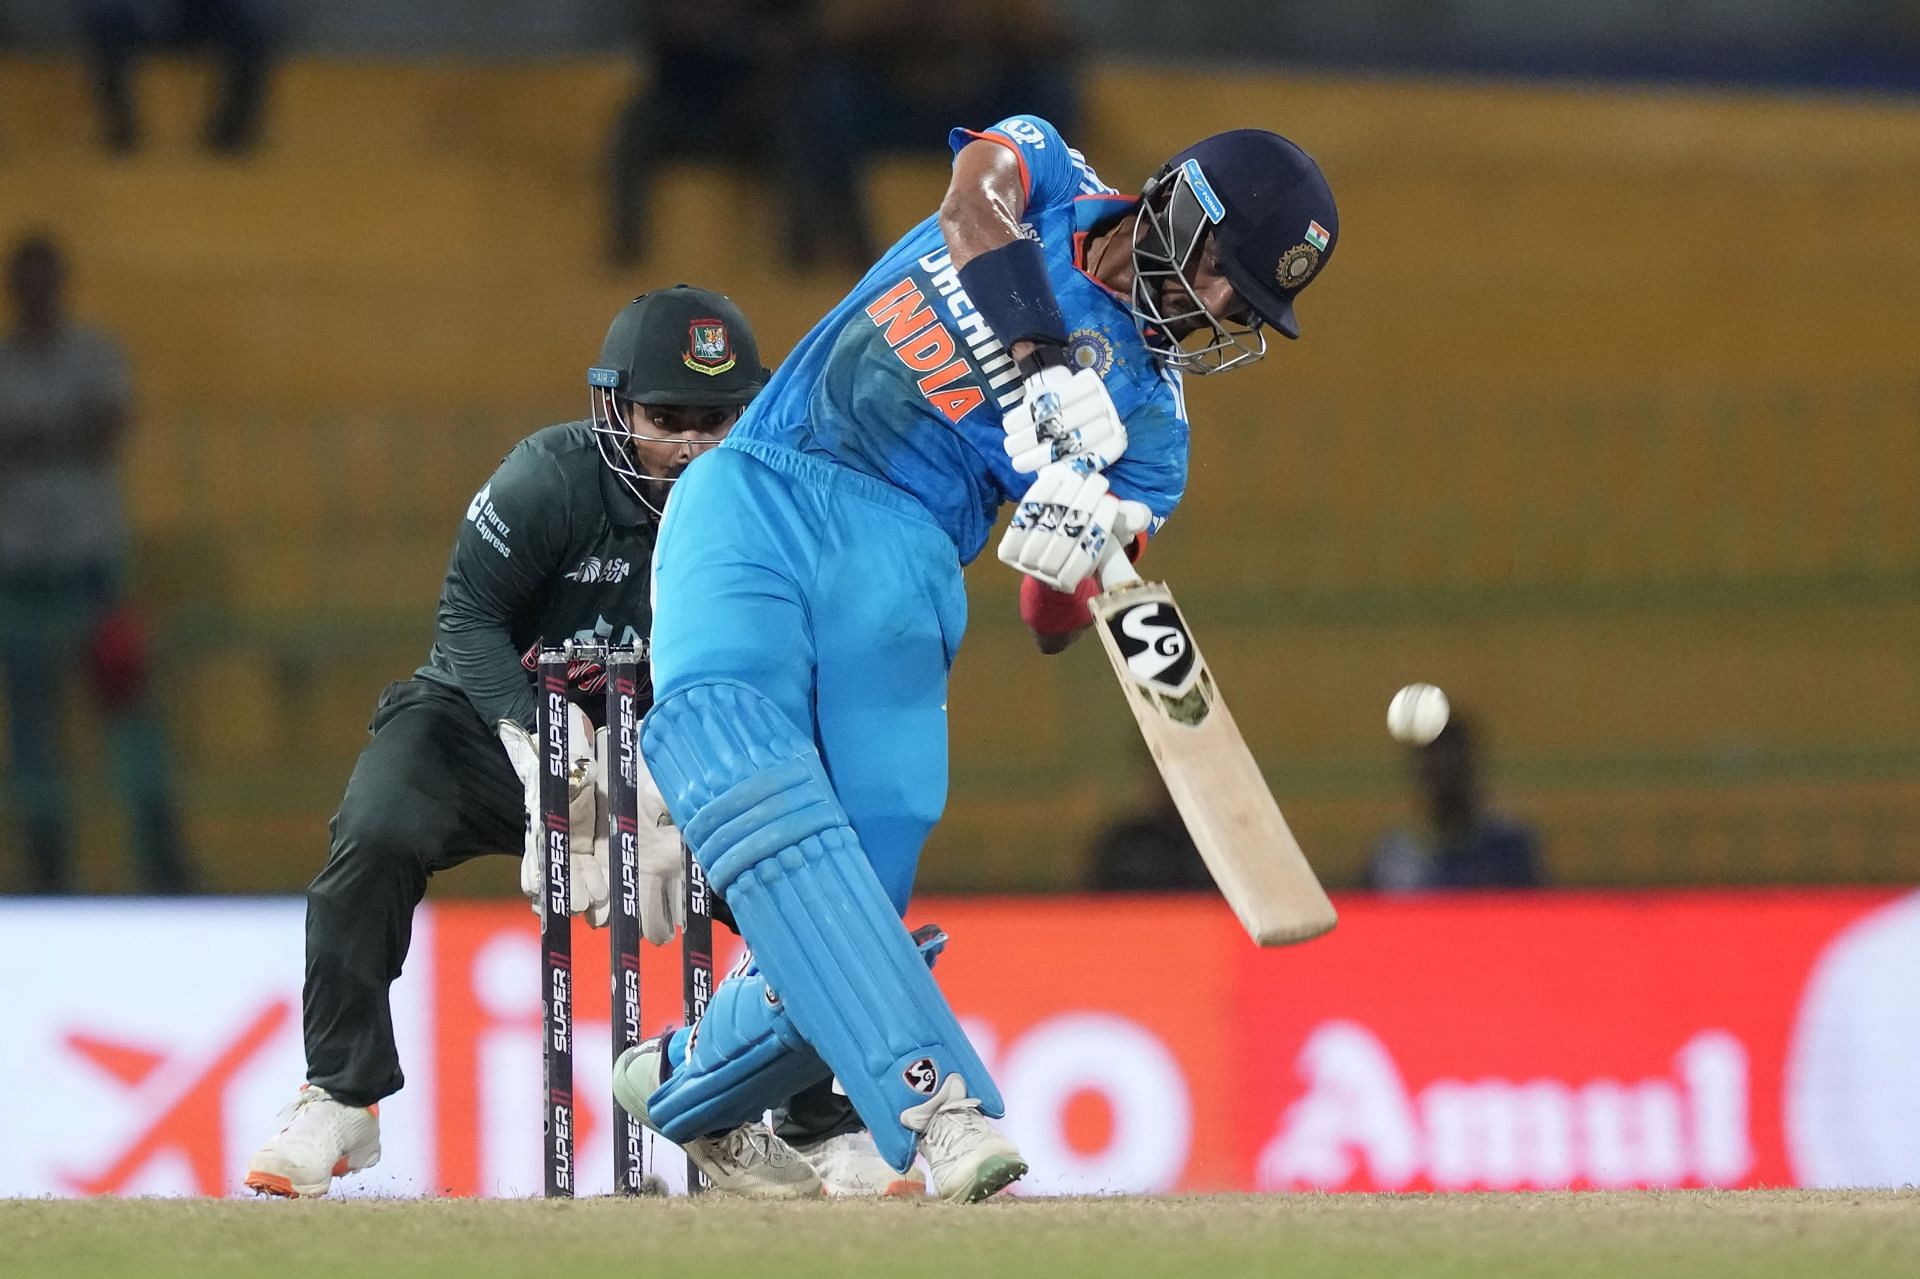 Axar Patel struck three fours and two sixes during his innings. [P/C: AP]